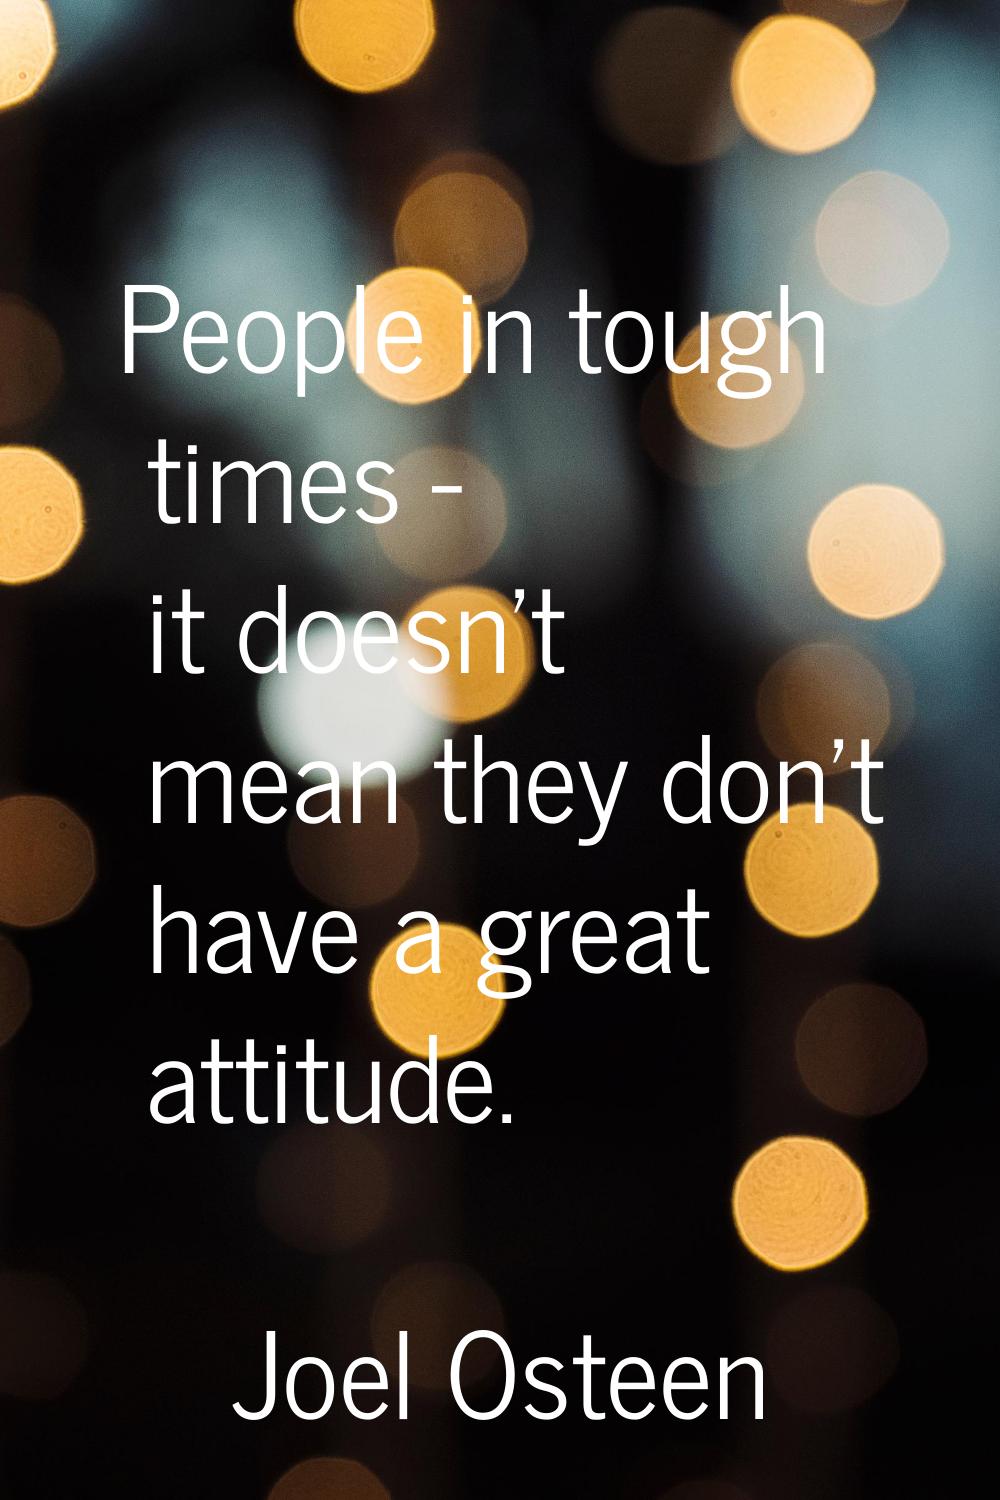 People in tough times - it doesn't mean they don't have a great attitude.